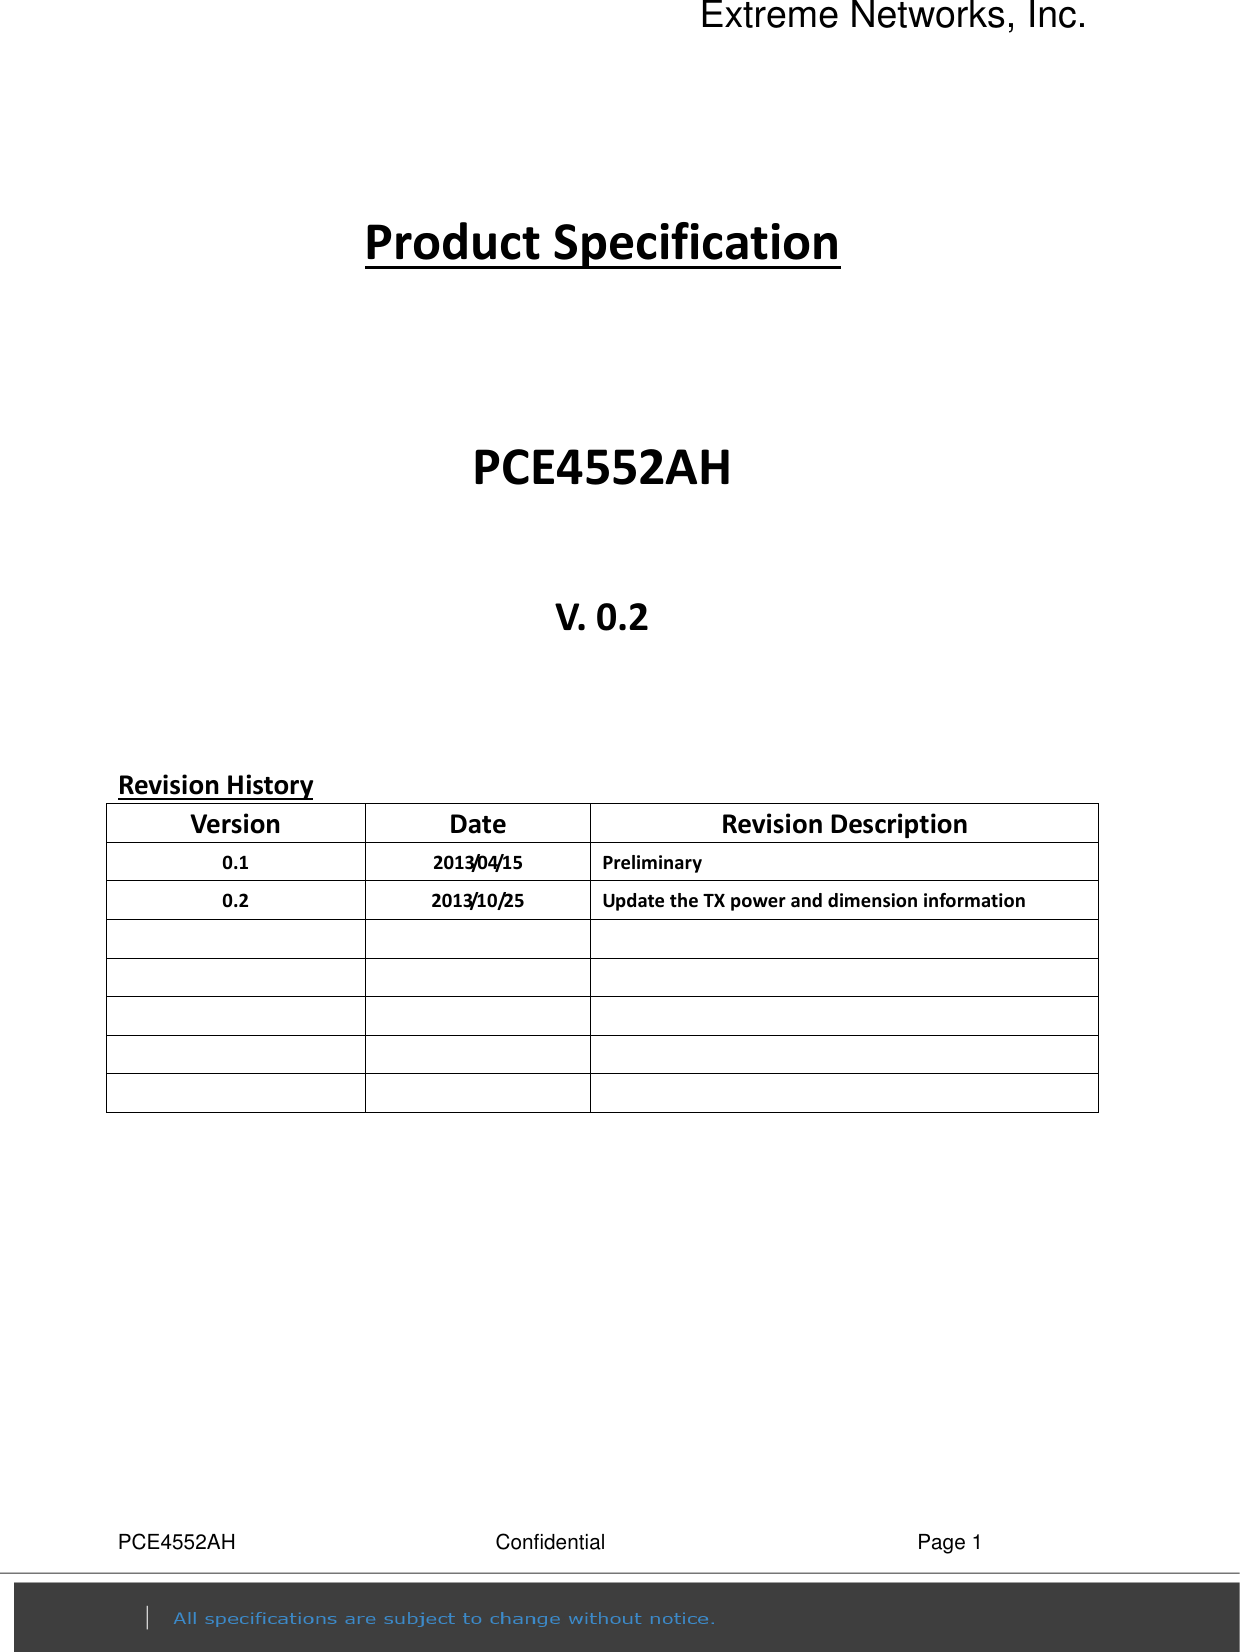 Extreme Networks, Inc. PCE4552AH  Confidential  Page 1  Product Specification   PCE4552AH  V. 0.2   Revision History Version  Date  Revision Description 0.1  2013/04/15  Preliminary 0.2  2013/10/25  Update the TX power and dimension information                           